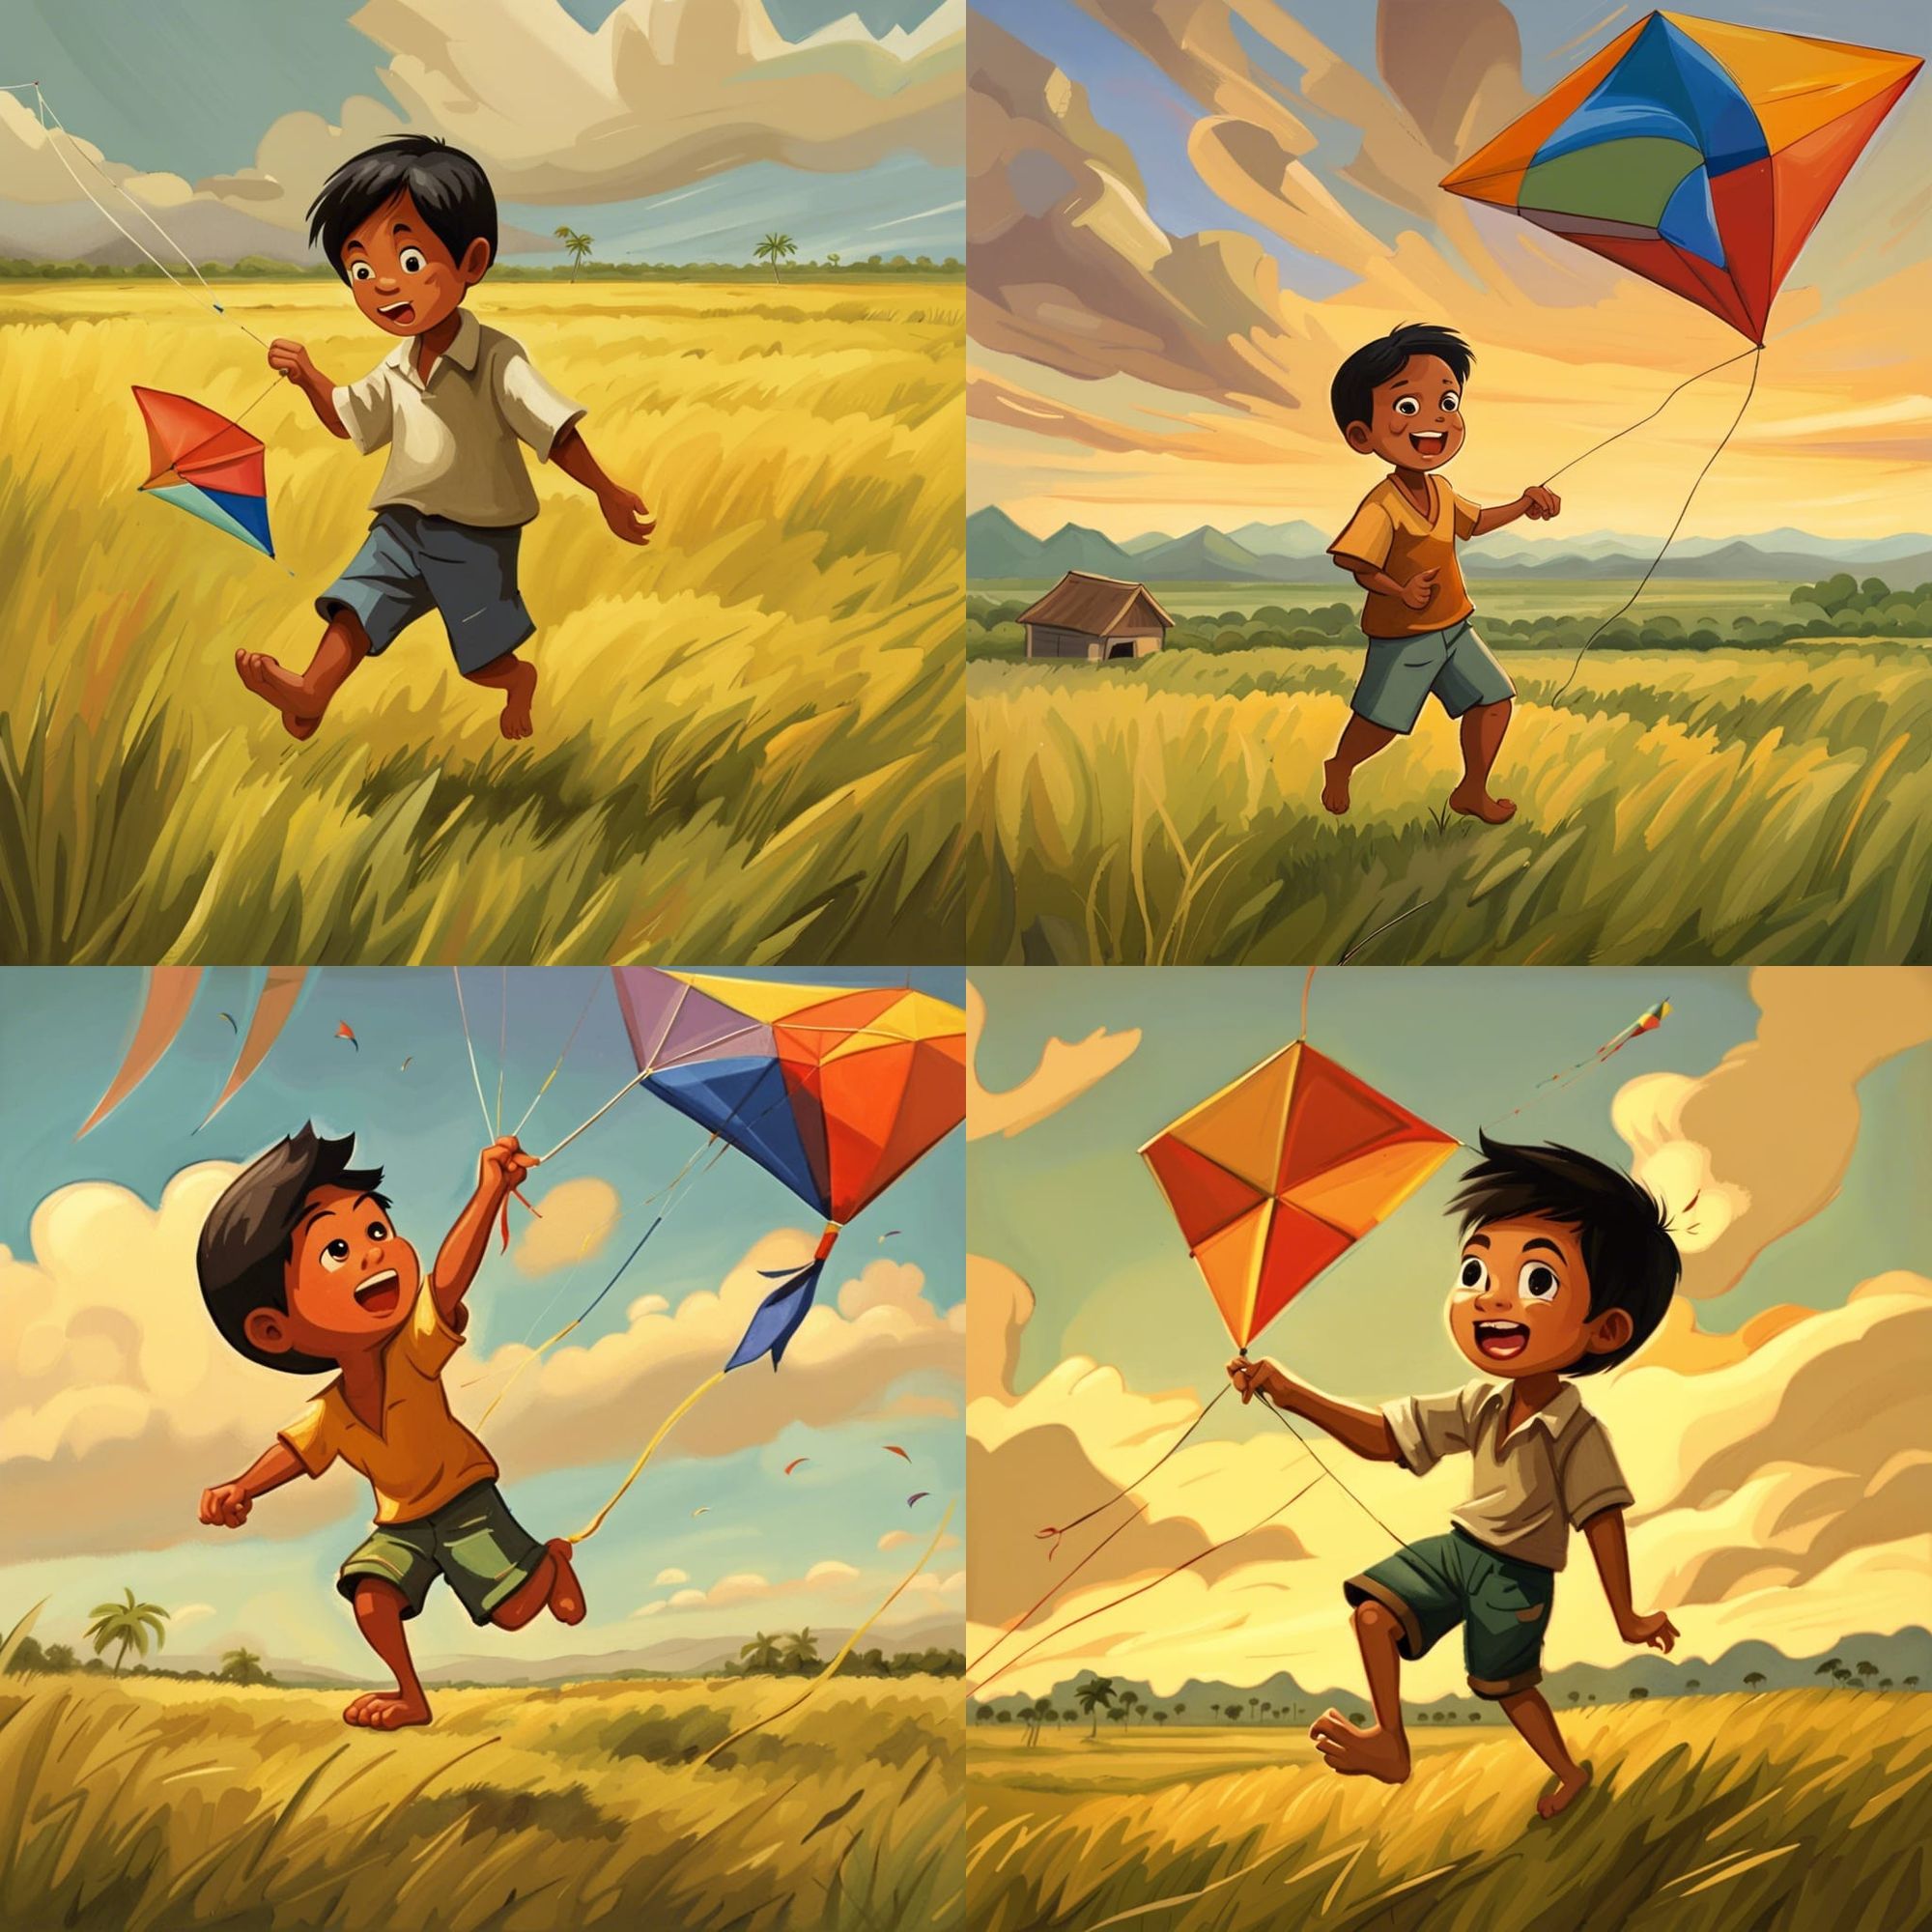 How to draw a boy flying kite with scenery | Kite flying scenery drawing  easy step by step - YouTube